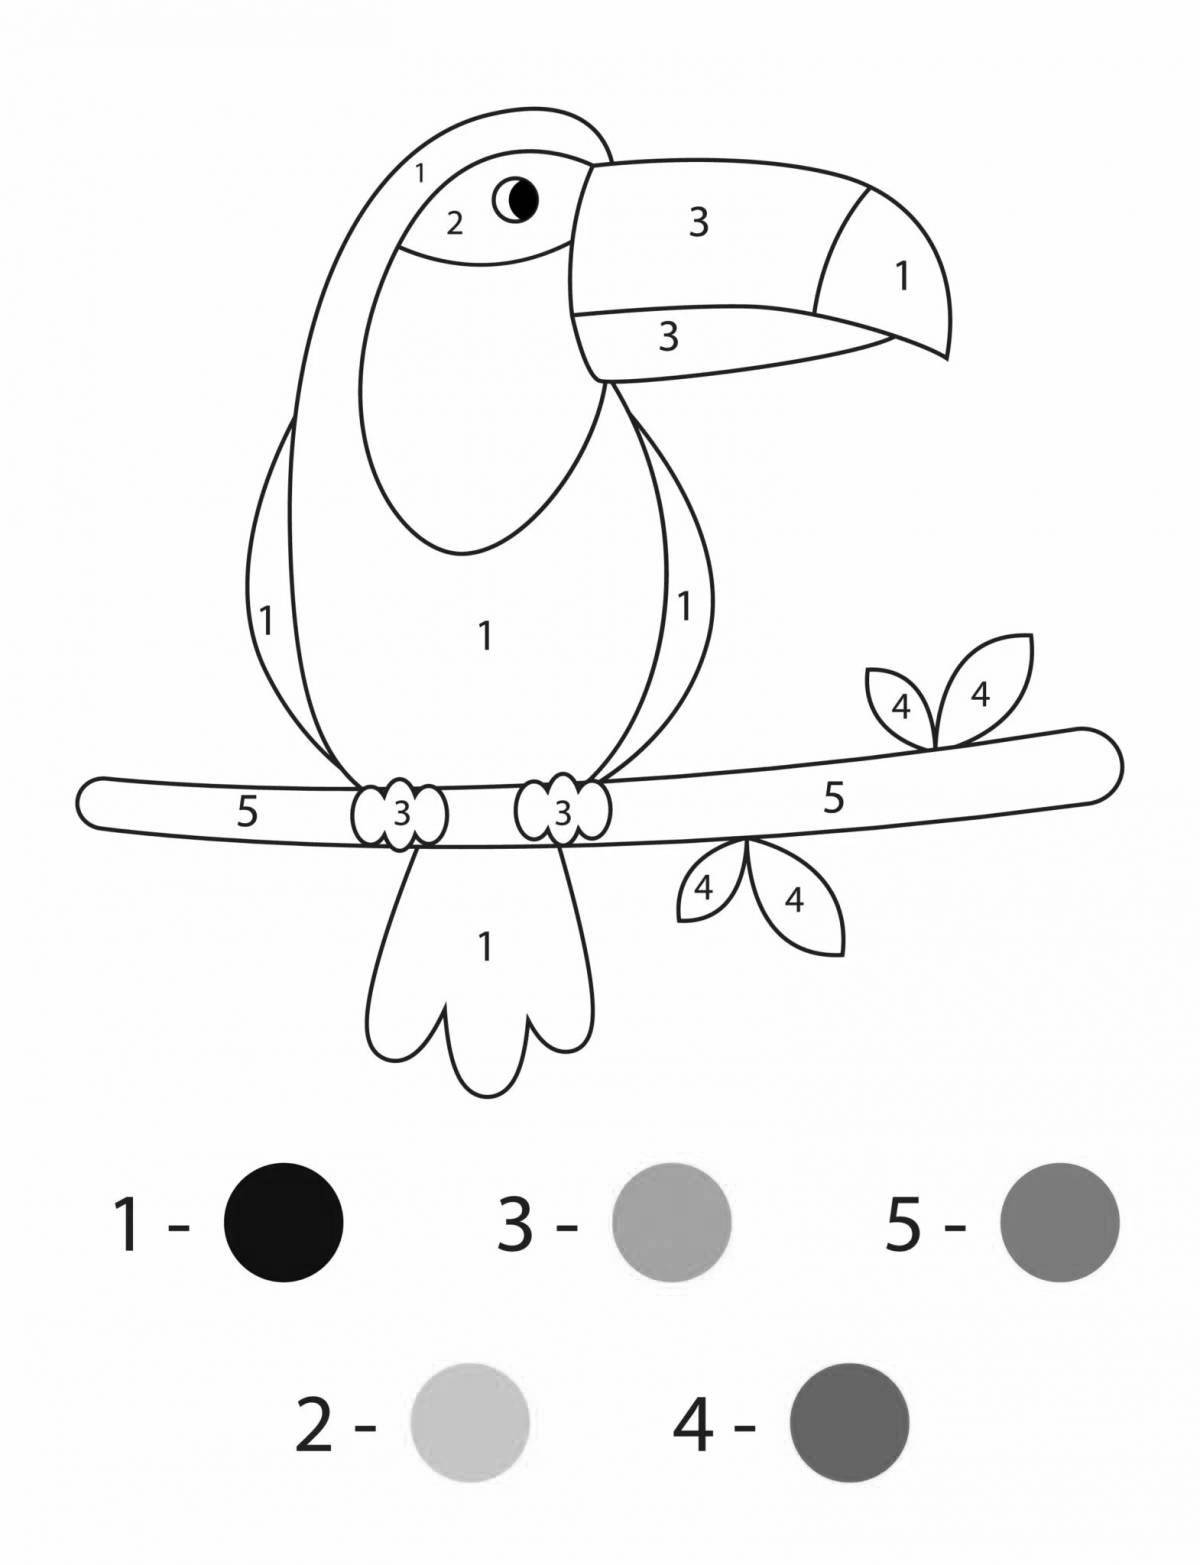 Colouring peaceful parrot by numbers